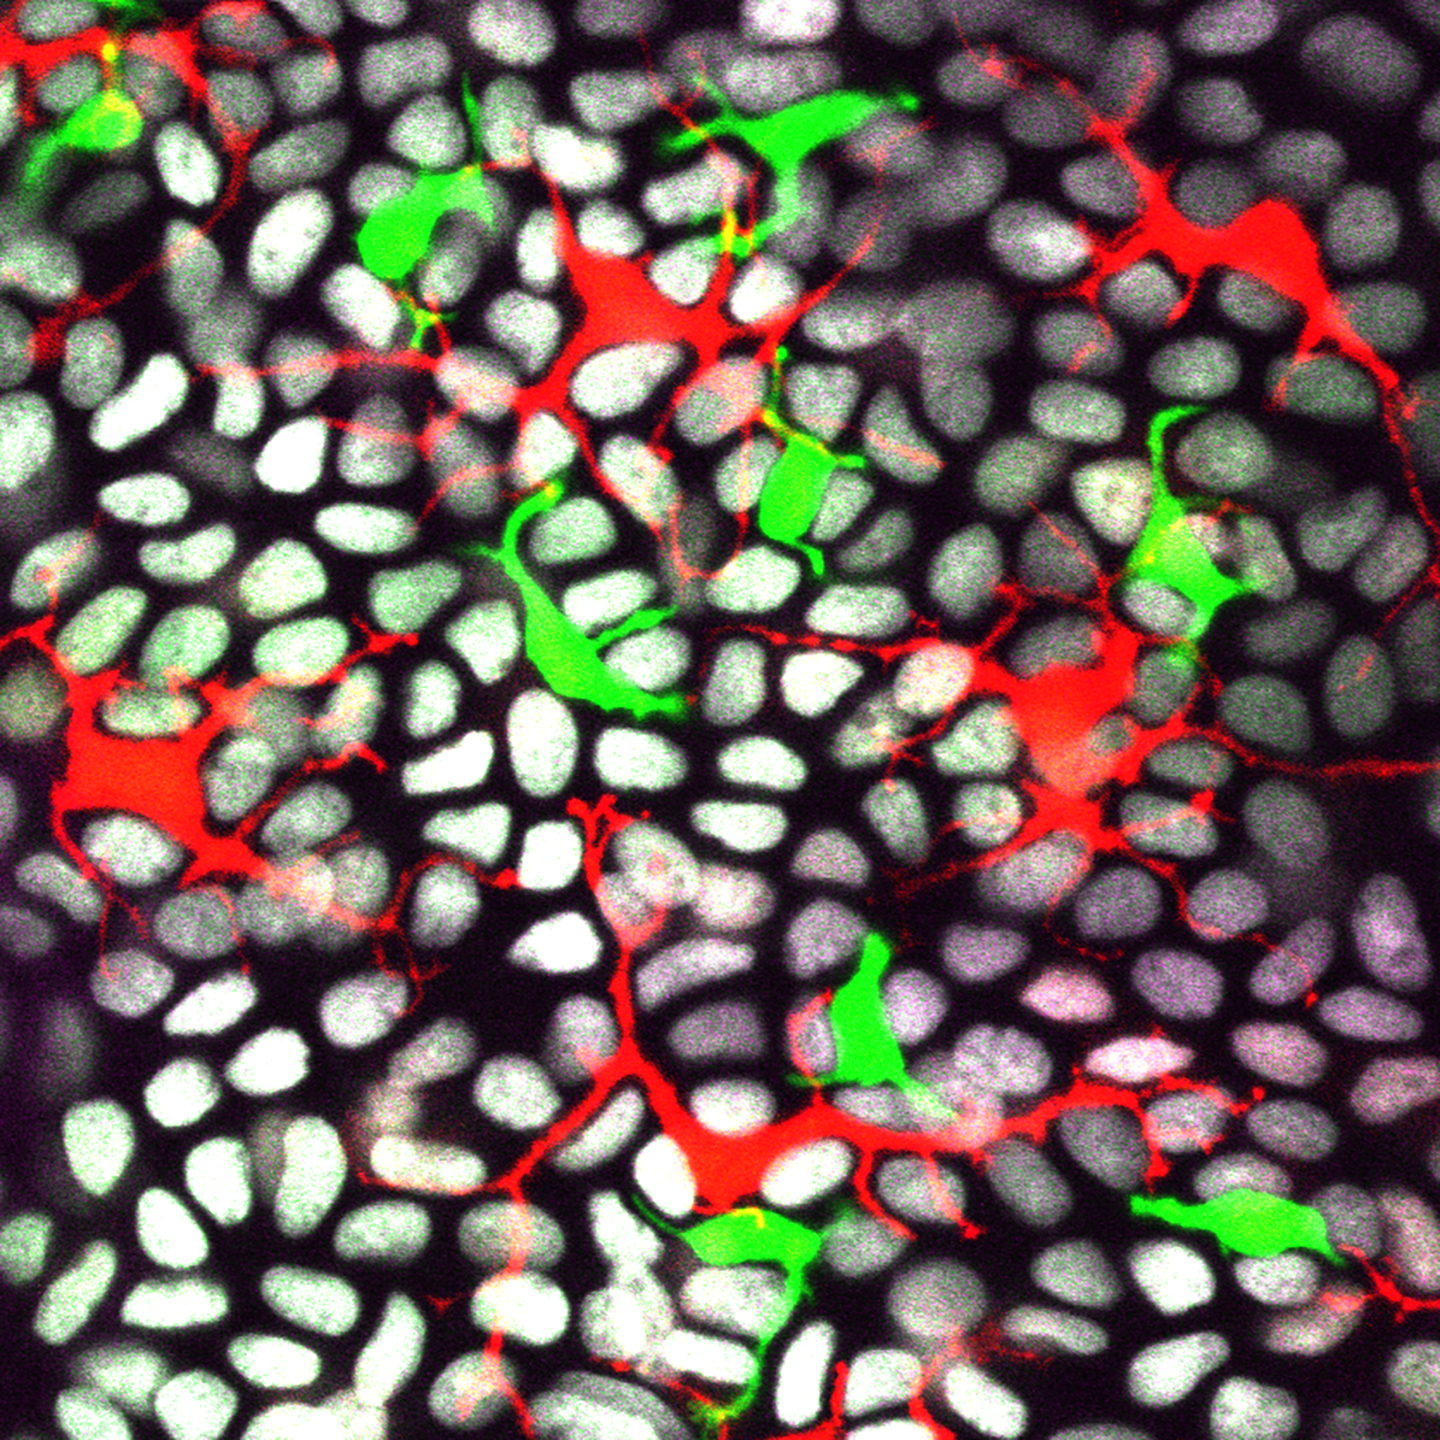 A microscope image of the skin epidermis shows an array of blob-like shapes, many of which are nuclei of epithelial cells with grayish white bean shapes. But there are also co-existing tissue-resident immune cells, labeled red (Langerhans cells) and green (dendritic epidermal T cells). Both cells have dendritic morphology that helps them surveil their environment.